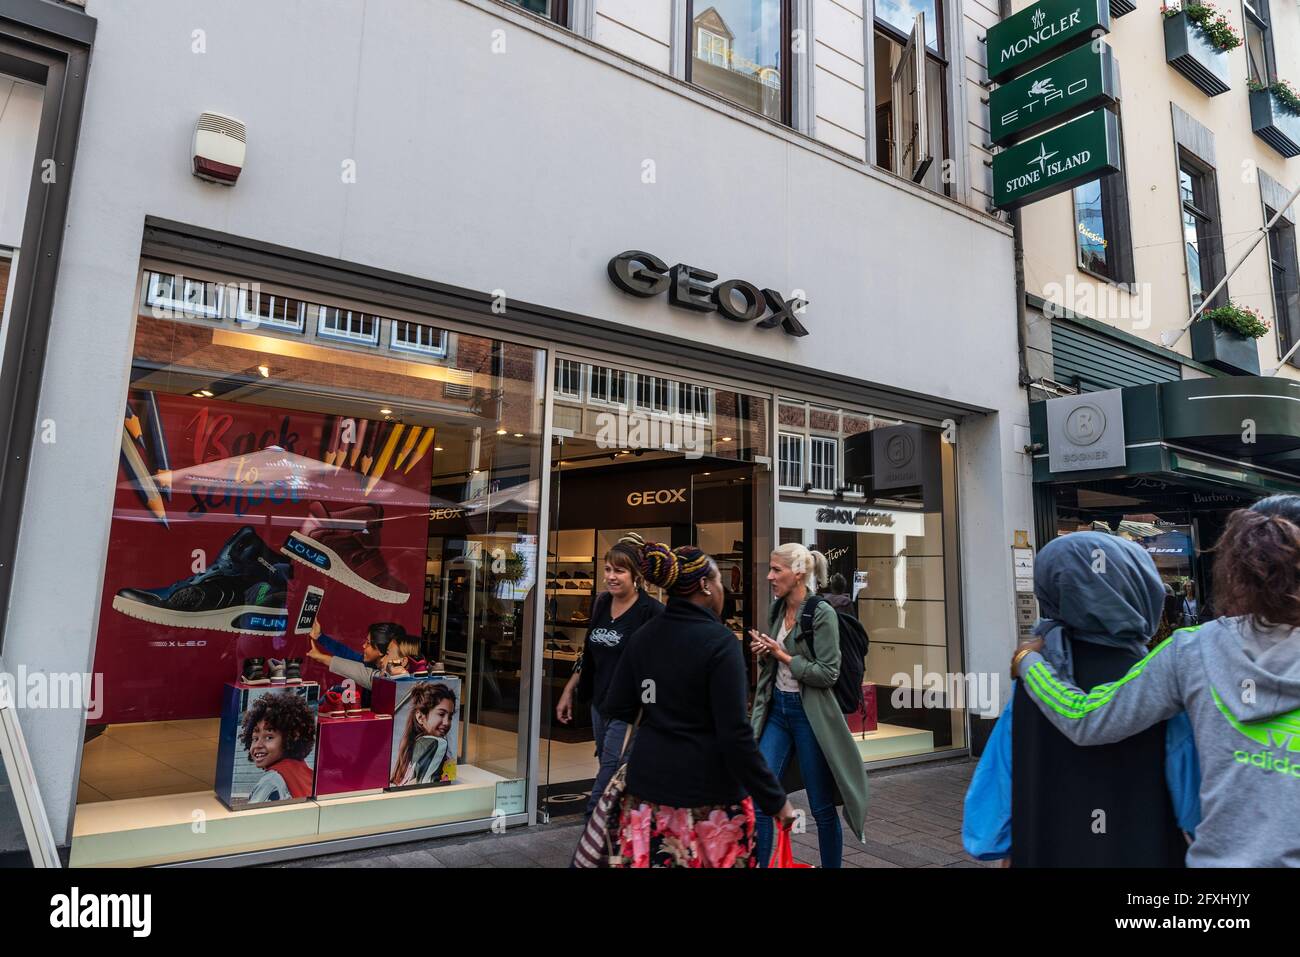 Bremen, Germany - August 19, 2019: Facade of a Geox shoe store with people  around in a shopping street of Bremen, Germany Stock Photo - Alamy